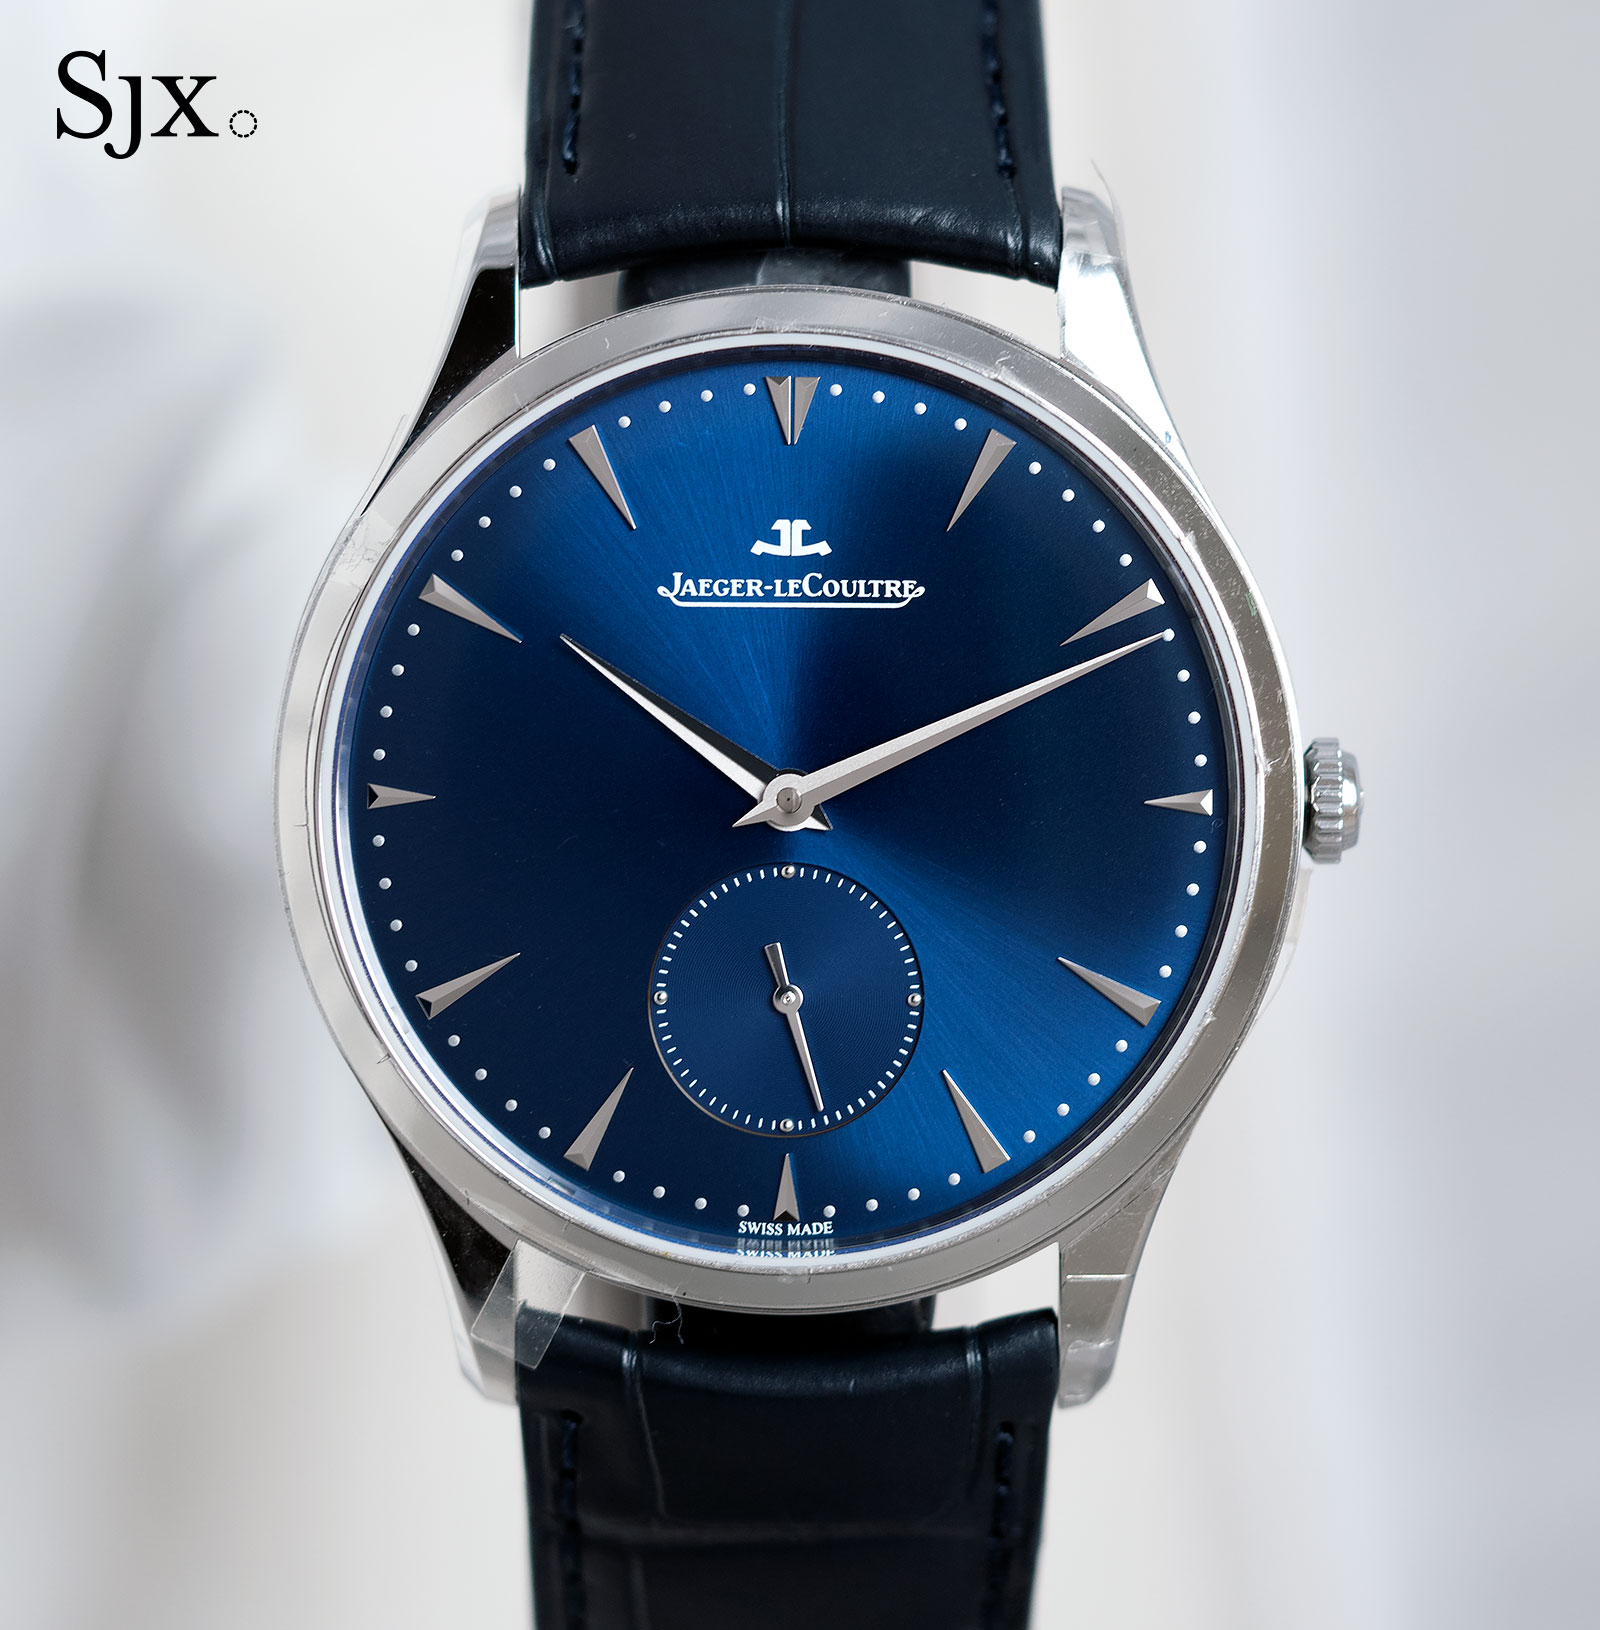 Jaeger-LeCoultre-Master-Ultra-Thin-Small-second-steel-blue-1.jpg